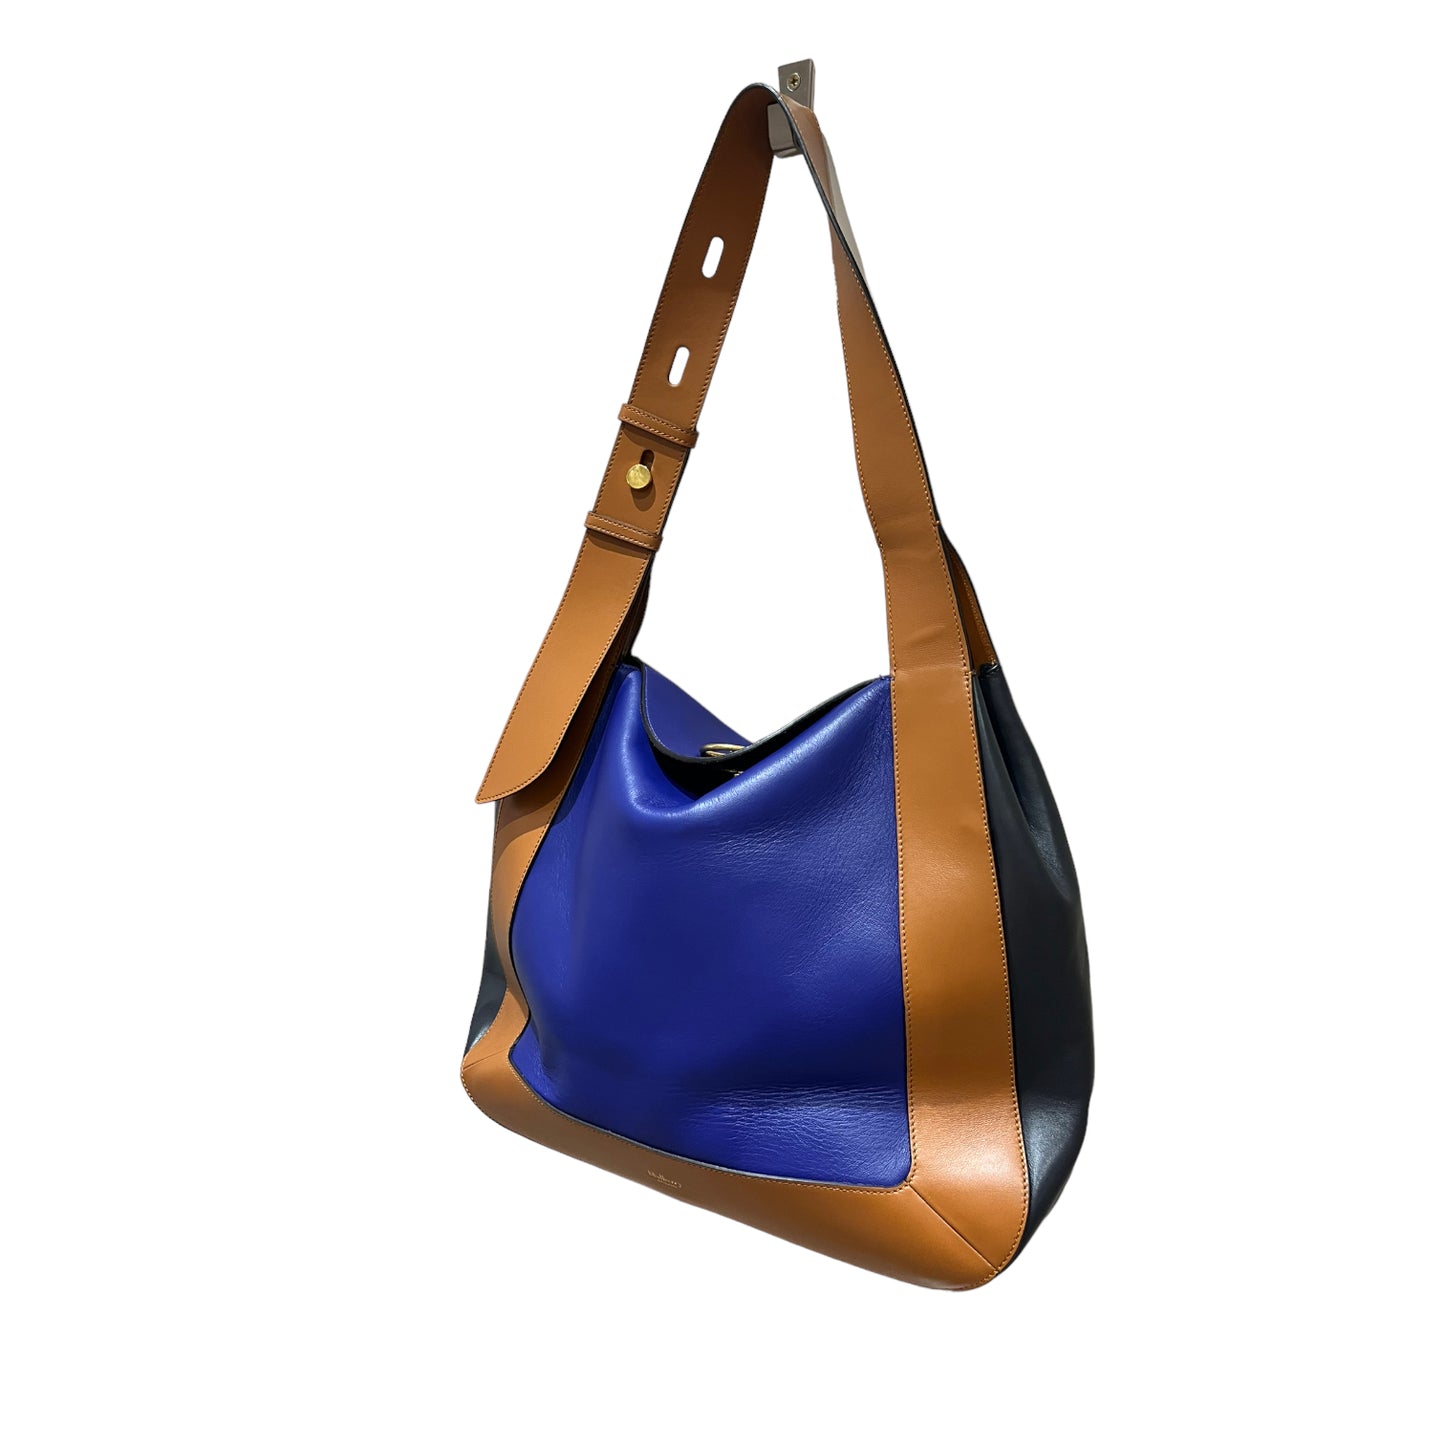 Mulberry Blue, Tan and Black Marloes Hobo Bag